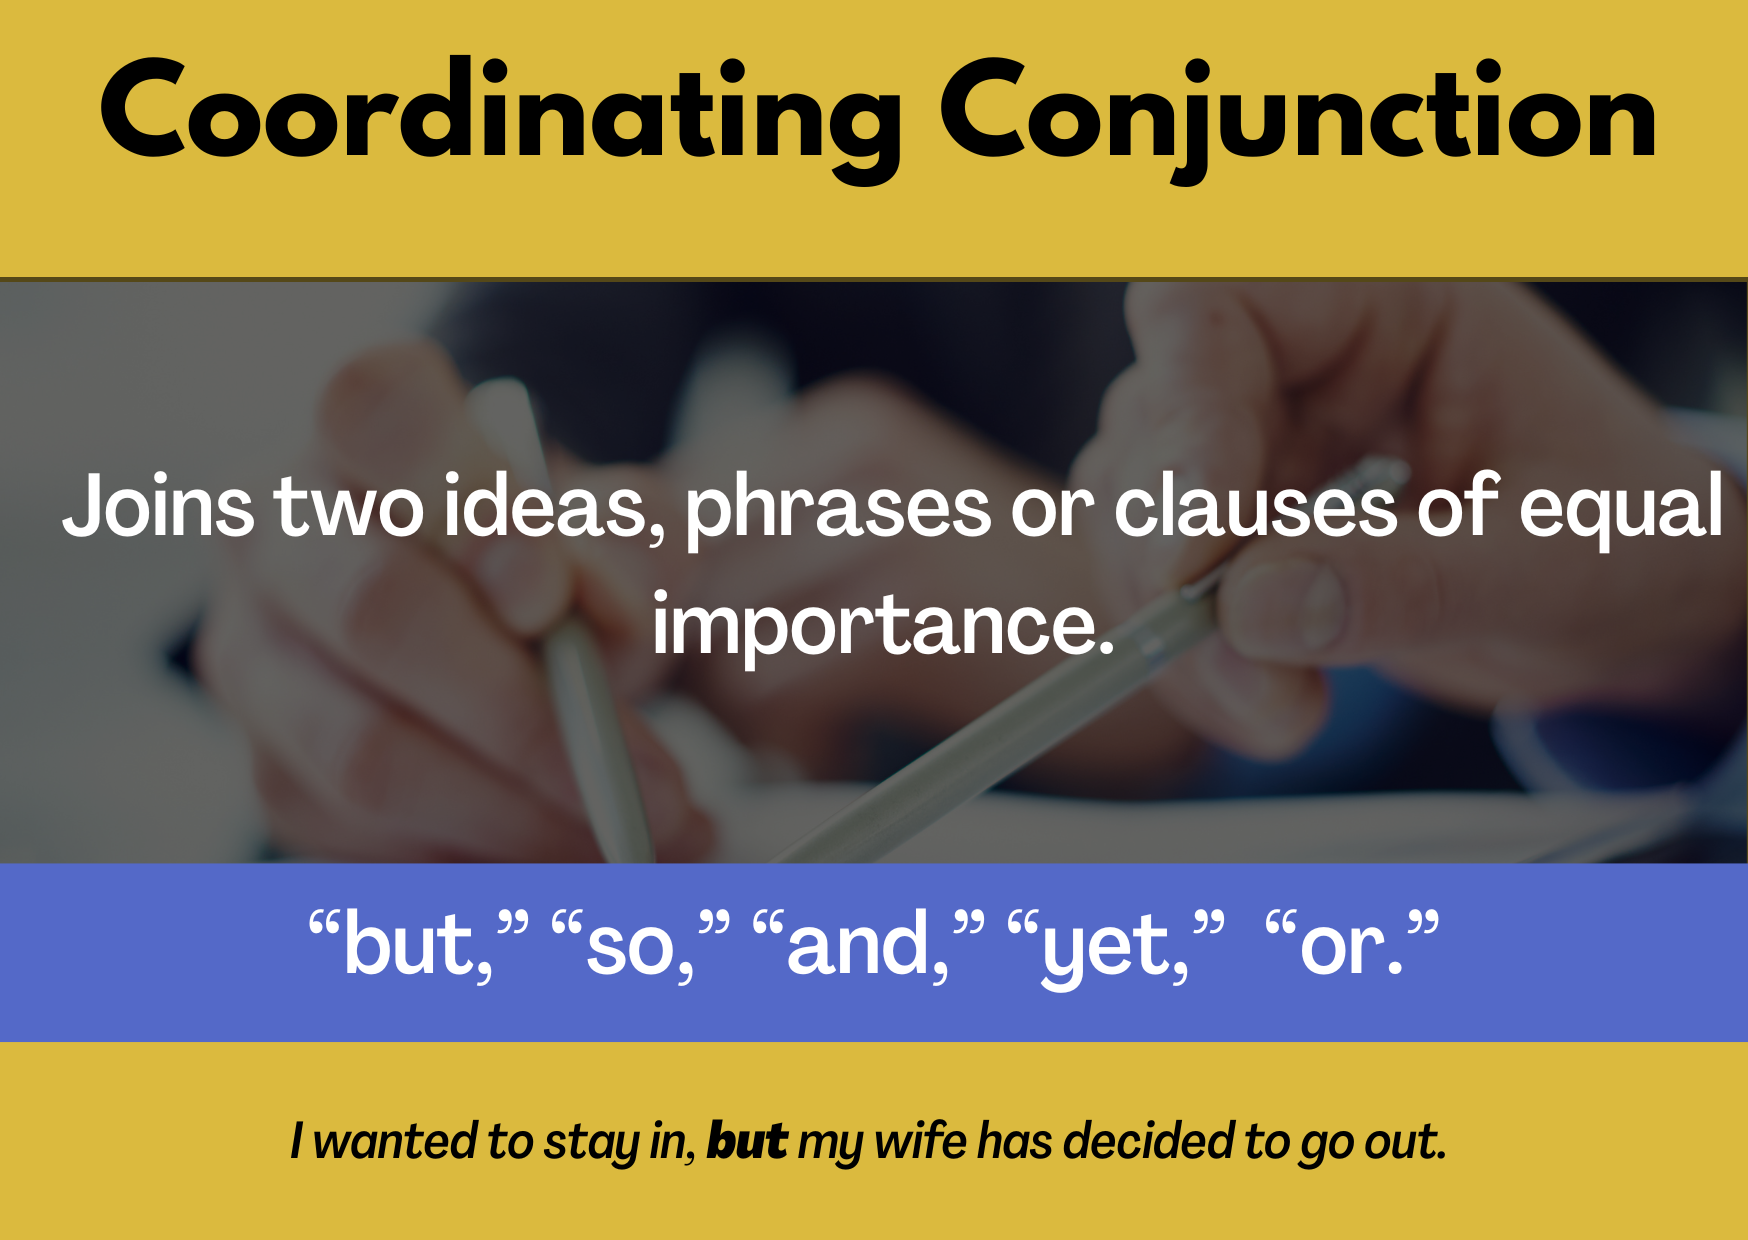 A graphic explaining a coordinating conjunction: "joins two ideas, phrases or clauses of importance". 